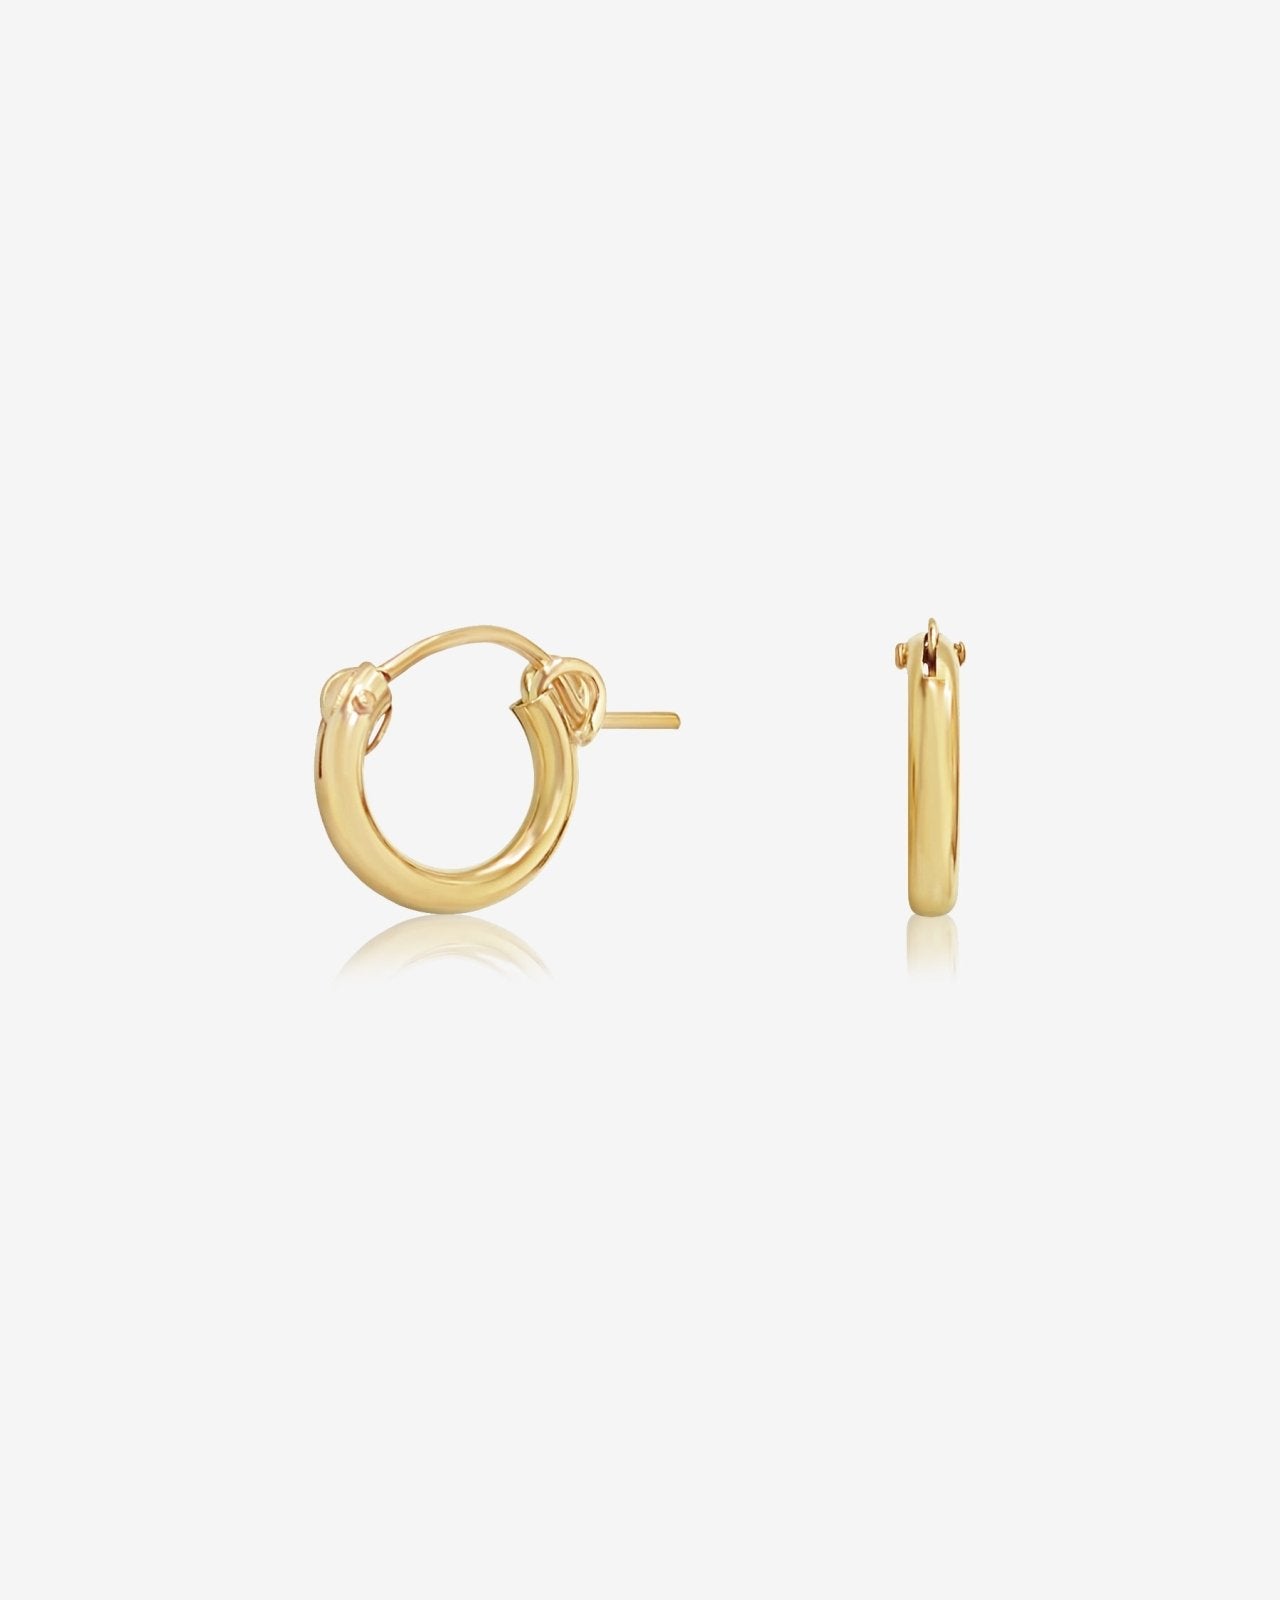 THICK HOOP EARRINGS - 14k Yellow Gold Fill - The Littl - 14k Yellow Gold Fill - 12mm Earrings